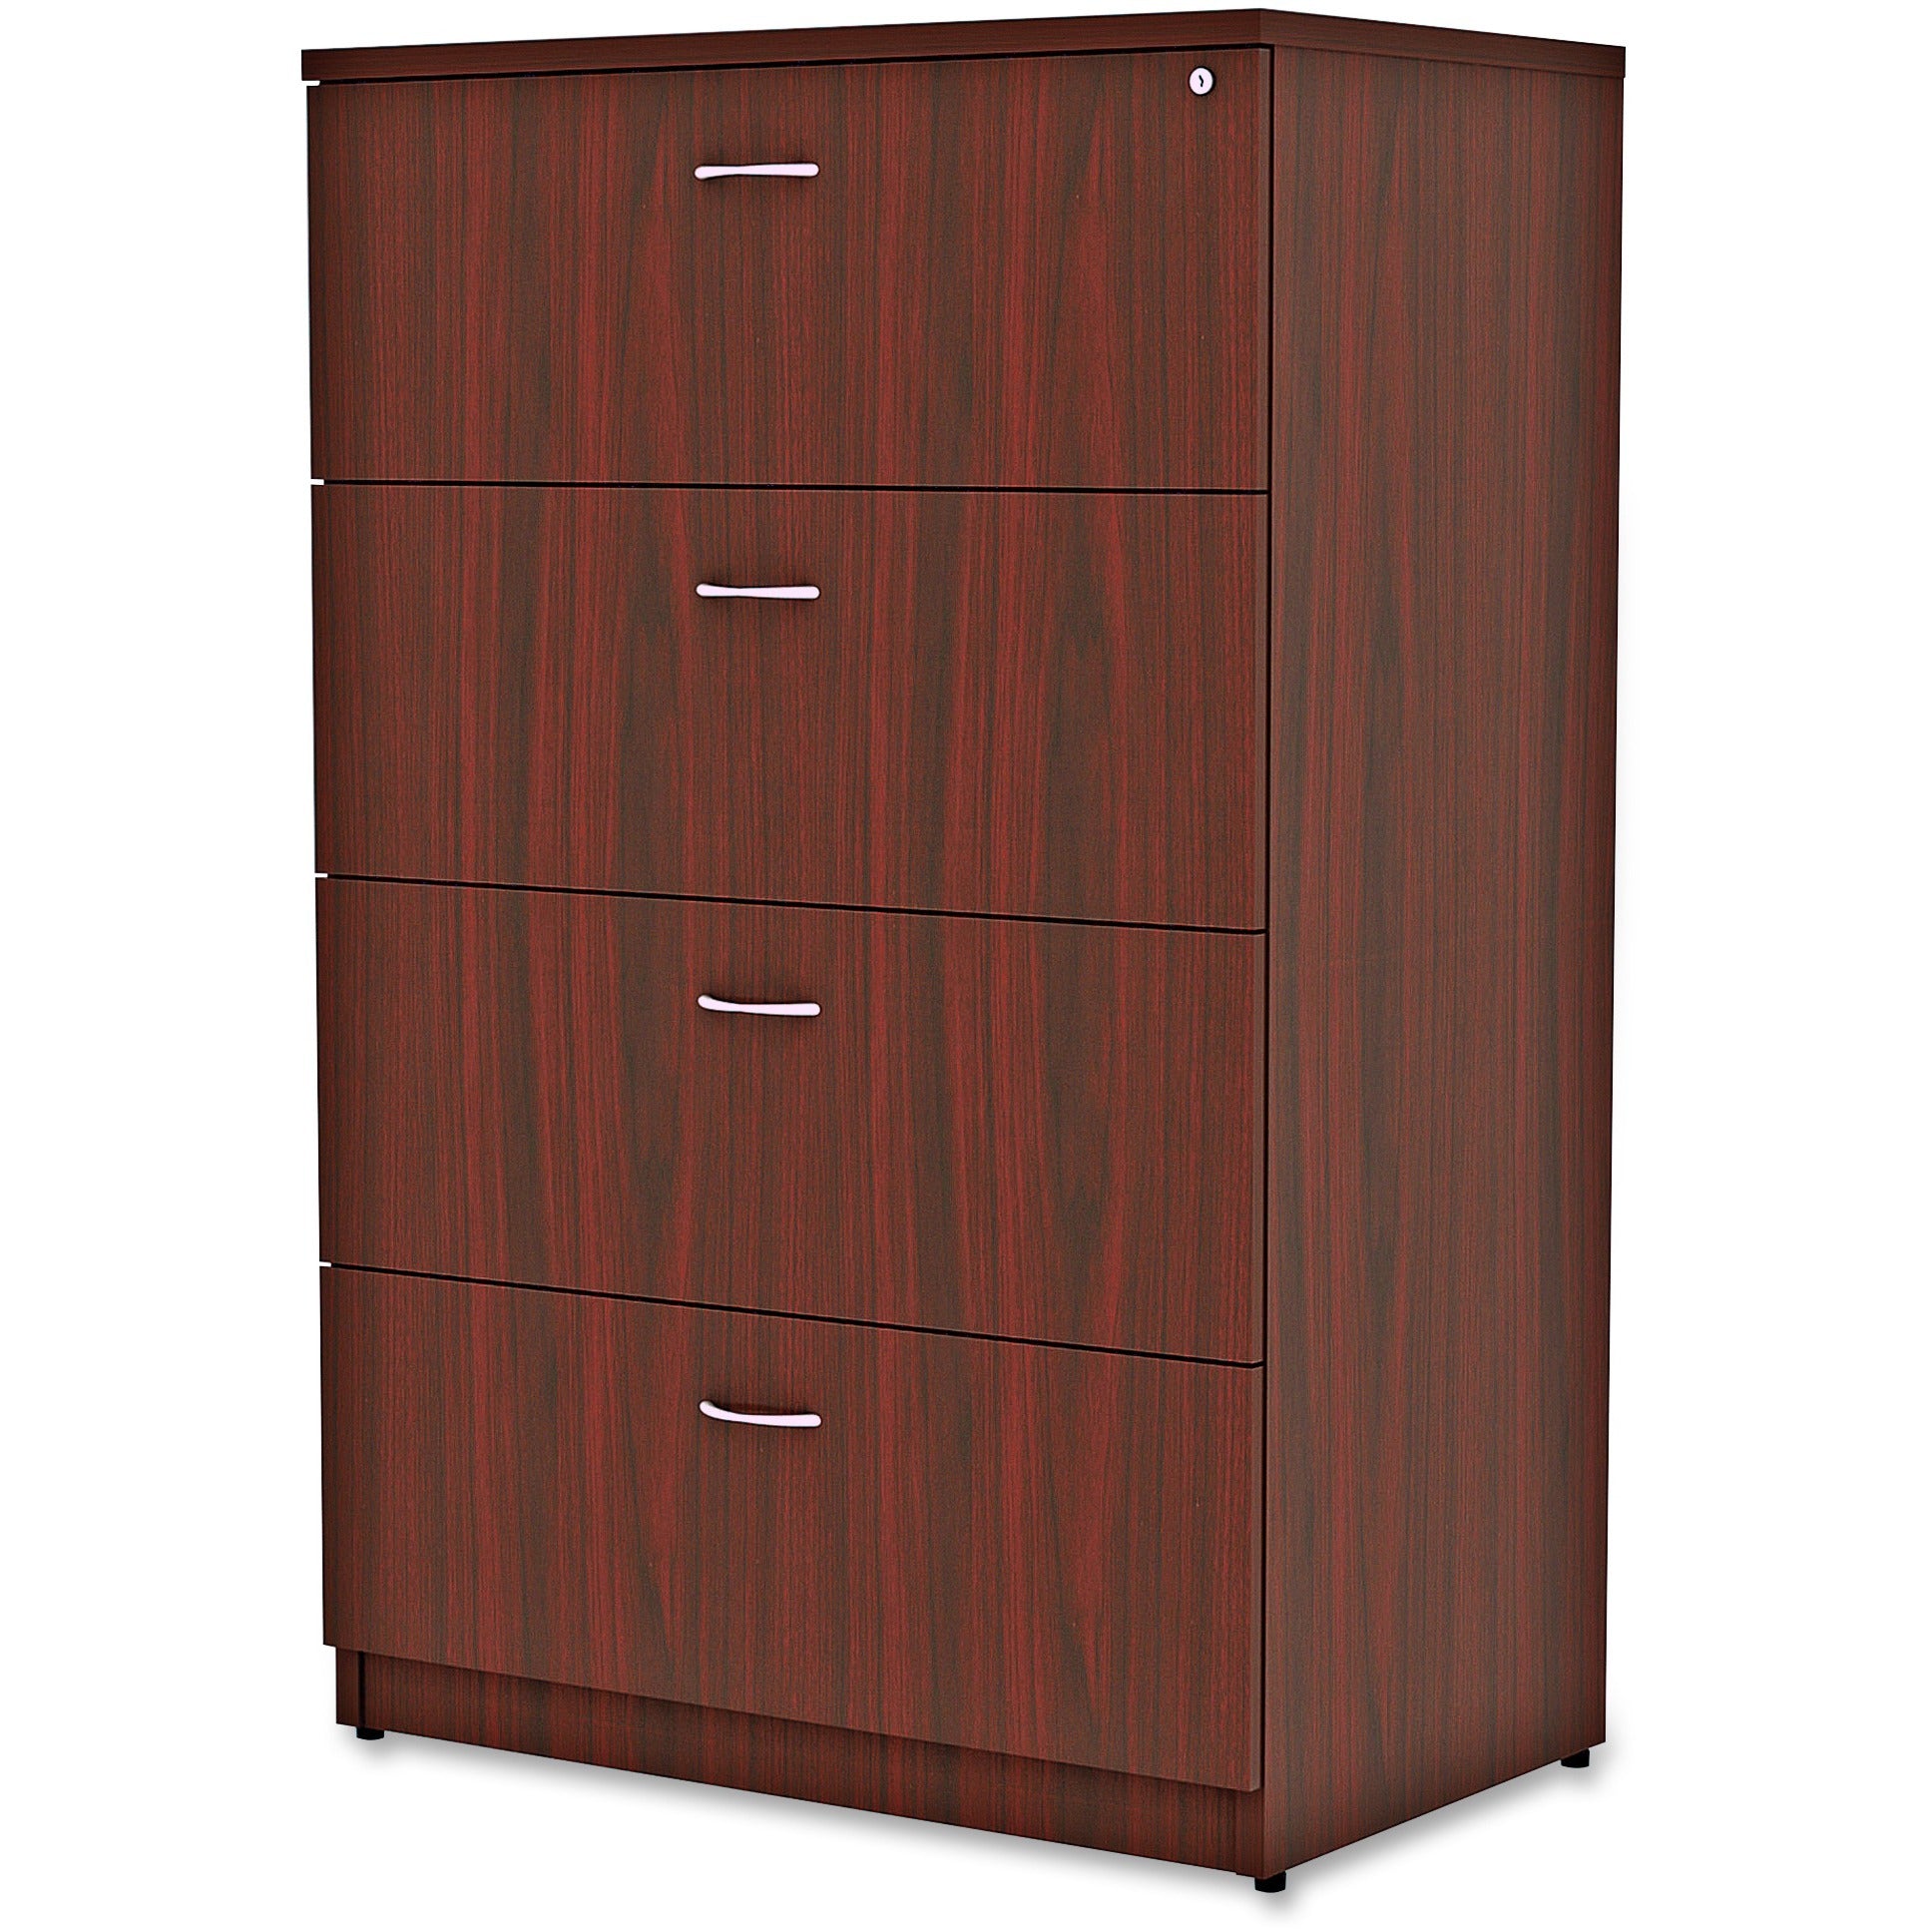 lorell-essentials-series-4-drawer-lateral-file-1-top-355-x-22548-4-x-file-drawers-finish-mahogany-laminate_llr34386 - 3